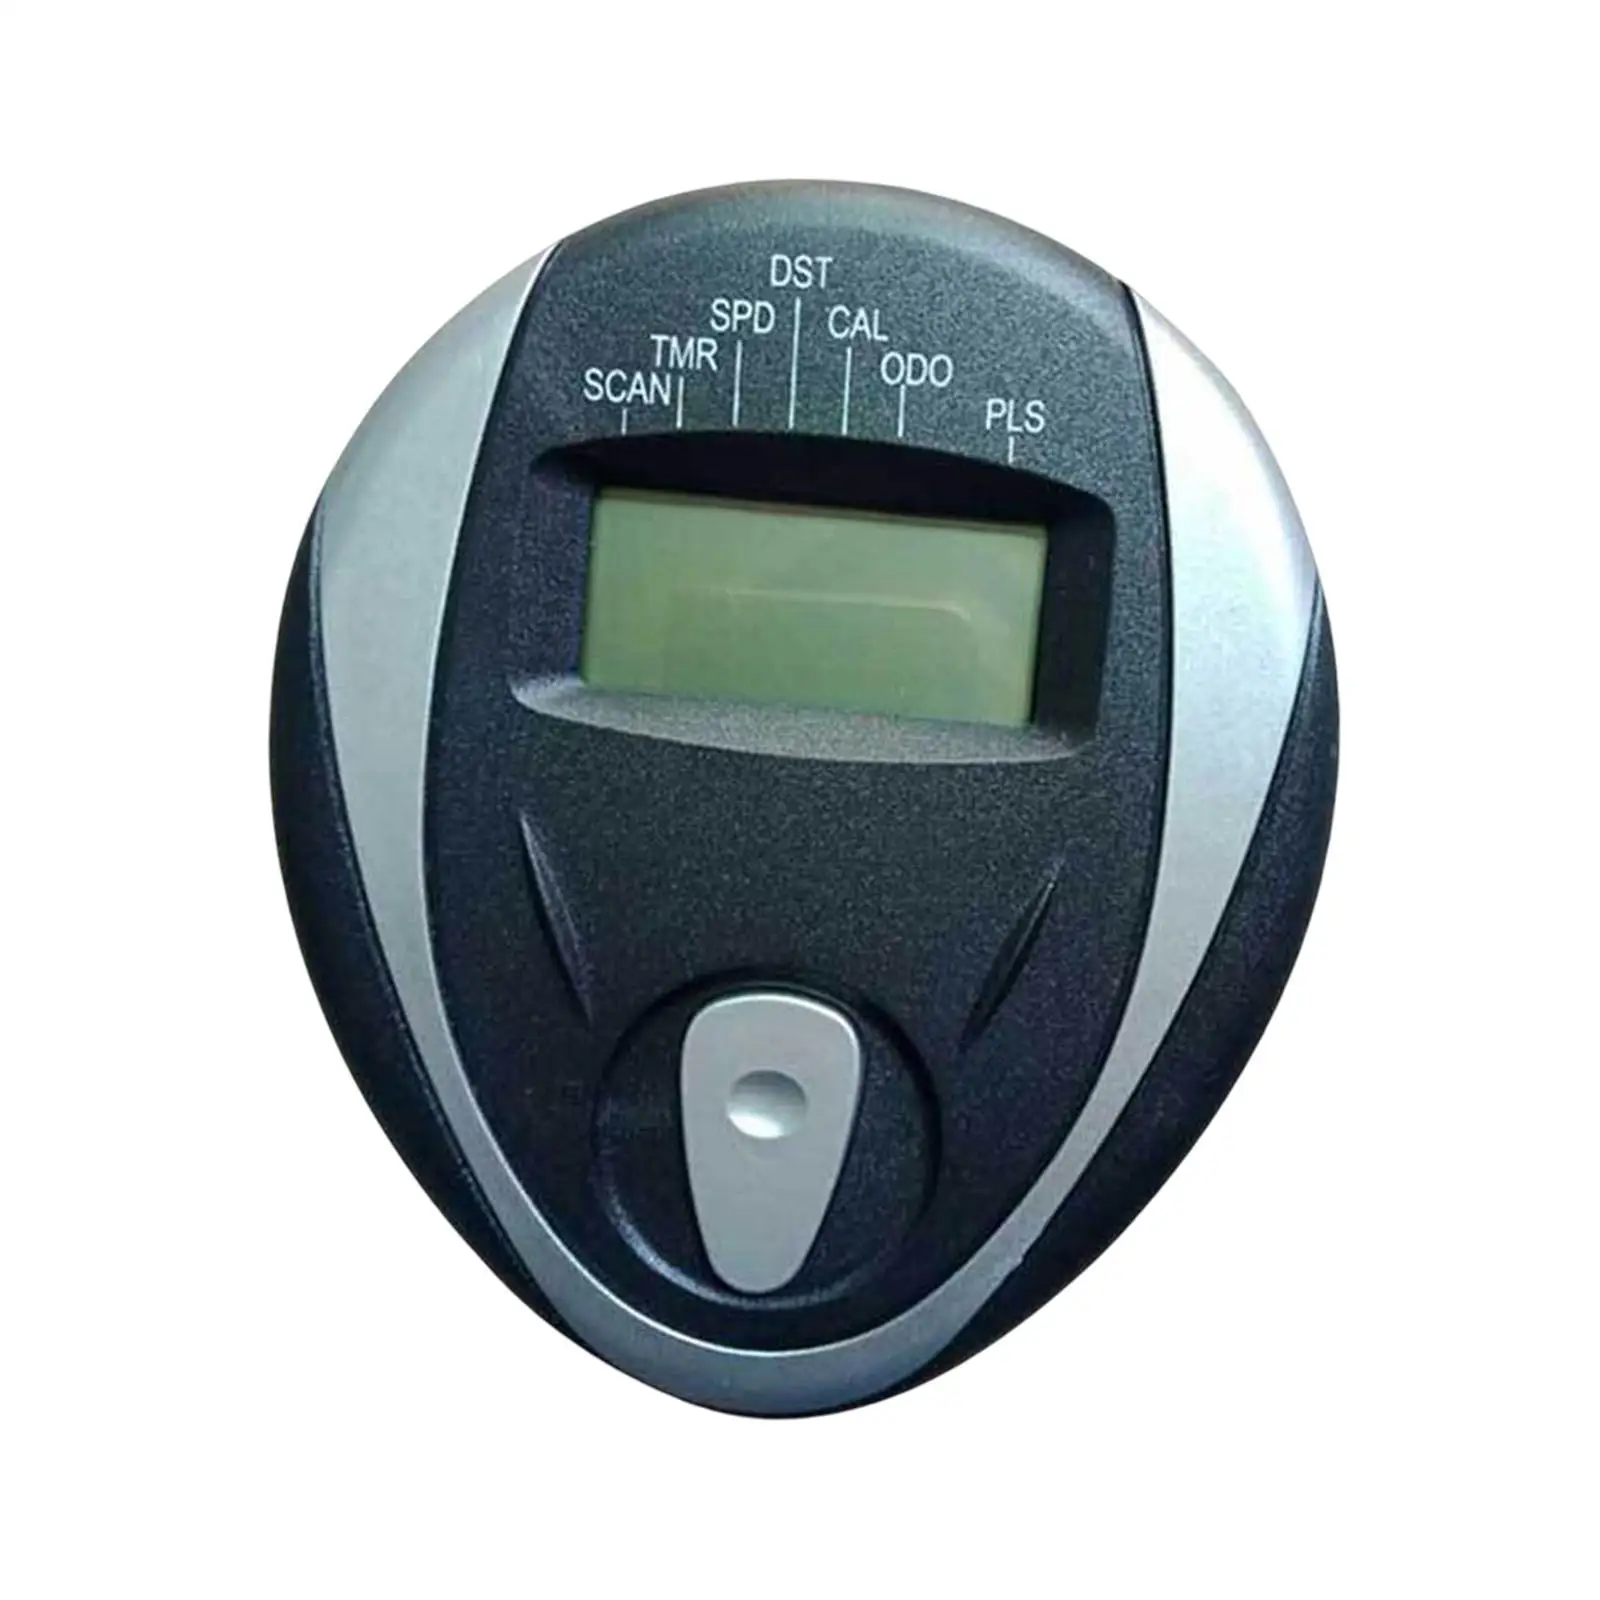 Monitor Speedometer LCD with Heart Rate Measurement for Computer Sport Bikes Spinning Bike